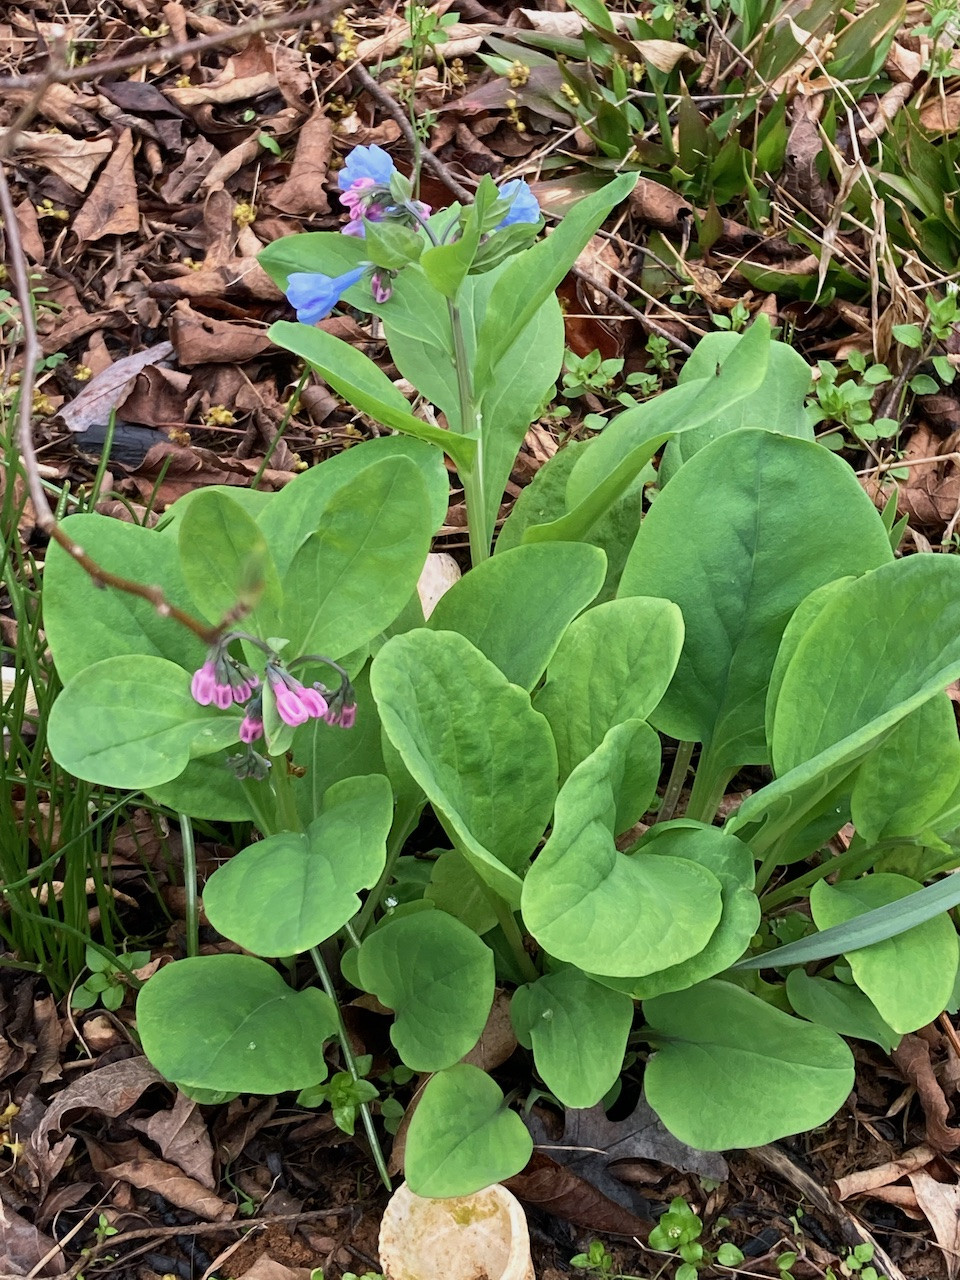 The Scientific Name is Mertensia virginica. You will likely hear them called Virginia Bluebells, Virginia Cowslip. This picture shows the Stems and leaves are somewhat succulent and the foliage has a dull blue-green color. of Mertensia virginica